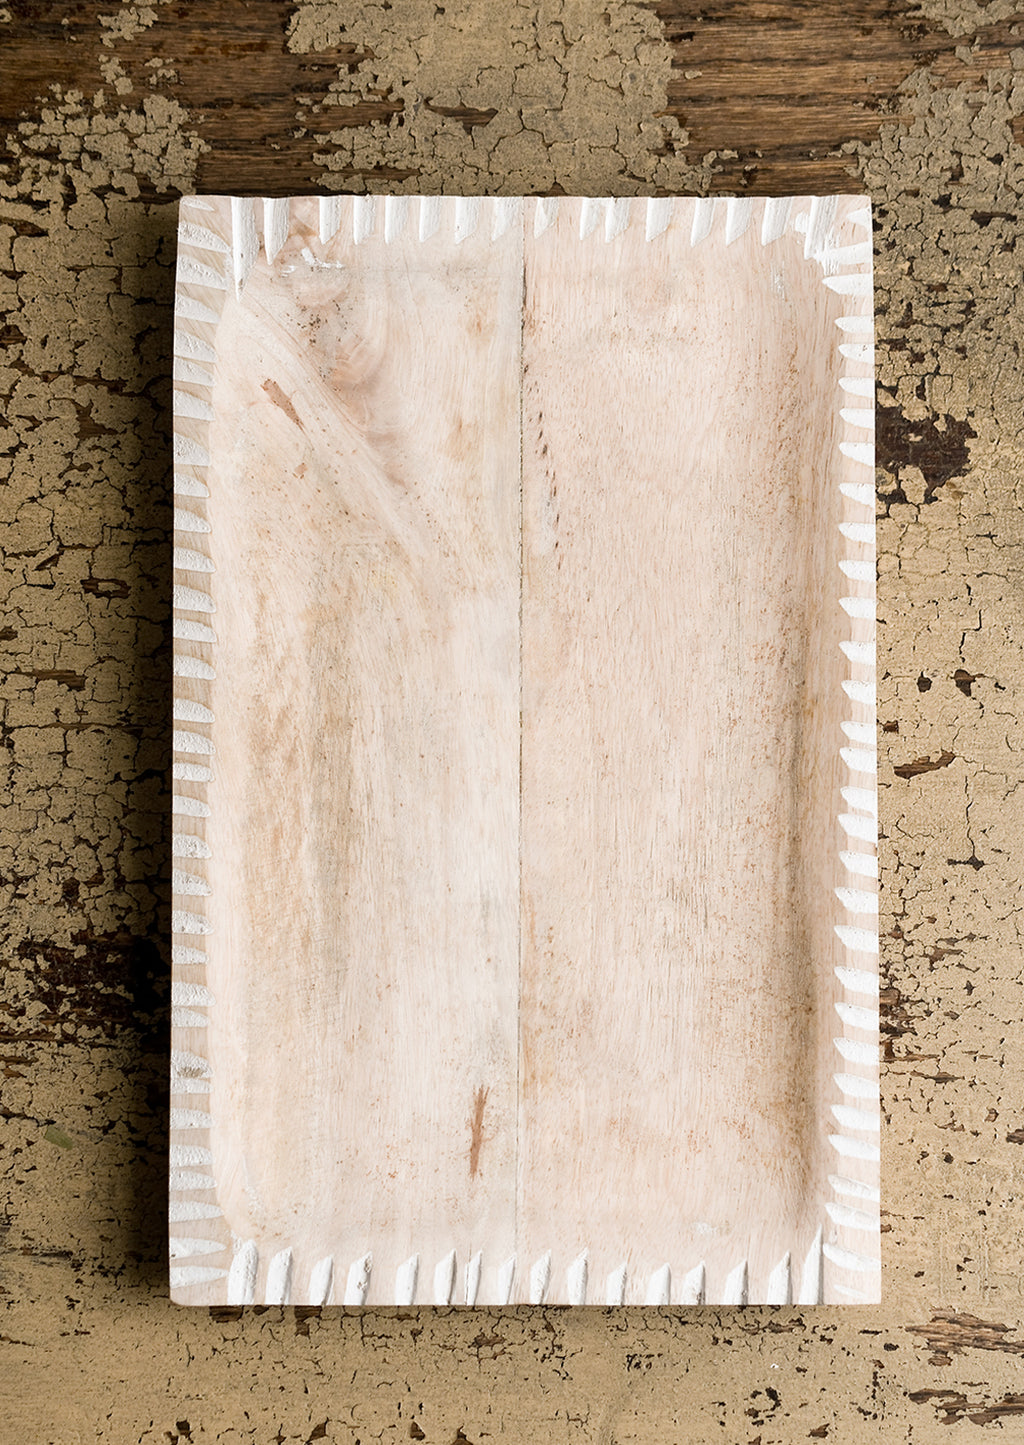 Wide: A rectangular tray in light colored wood with white painted notched border.